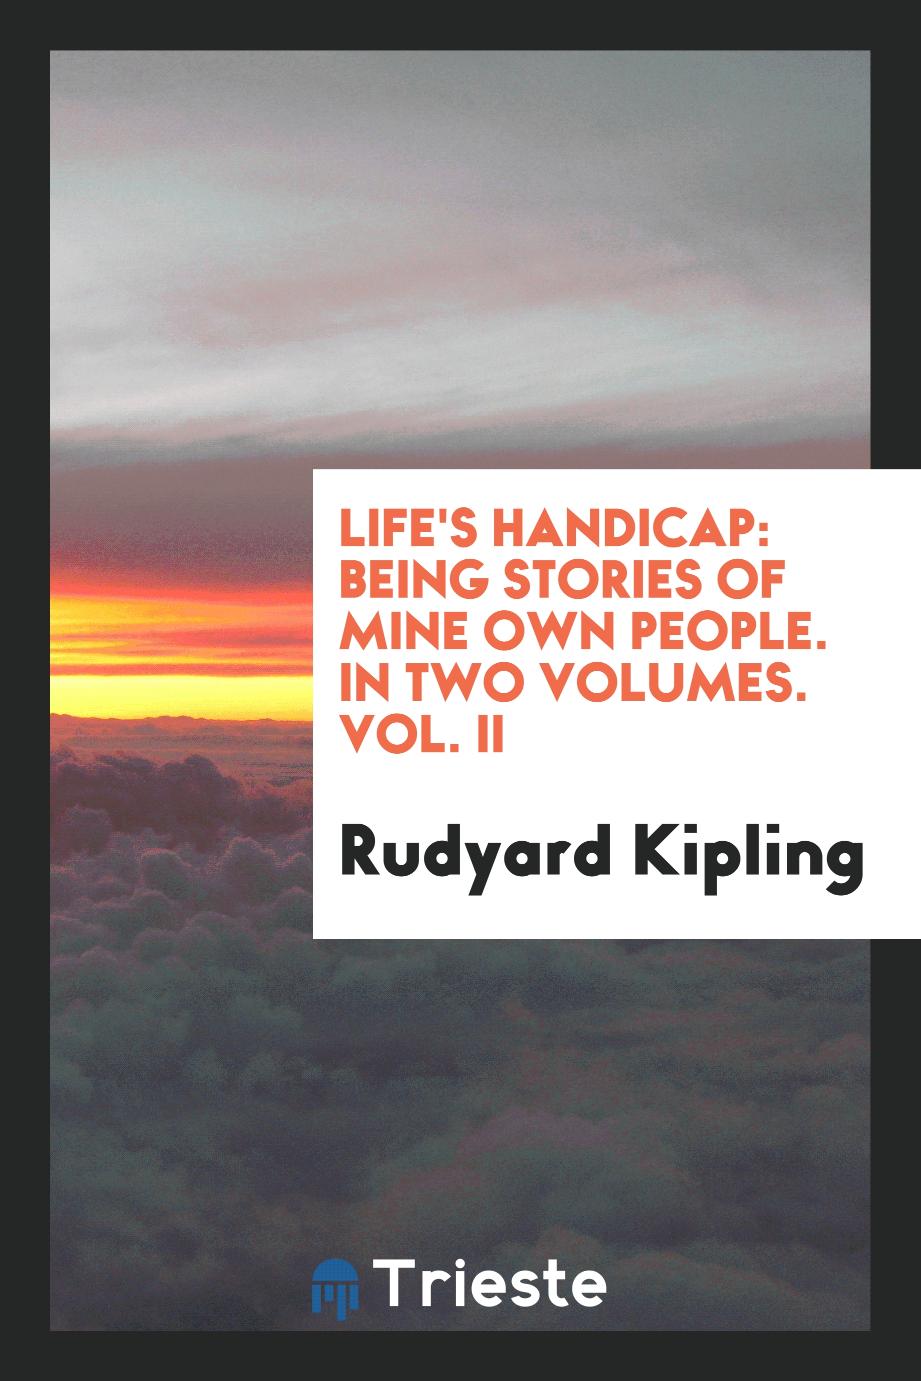 Life's handicap: being stories of mine own people. In two volumes. Vol. II